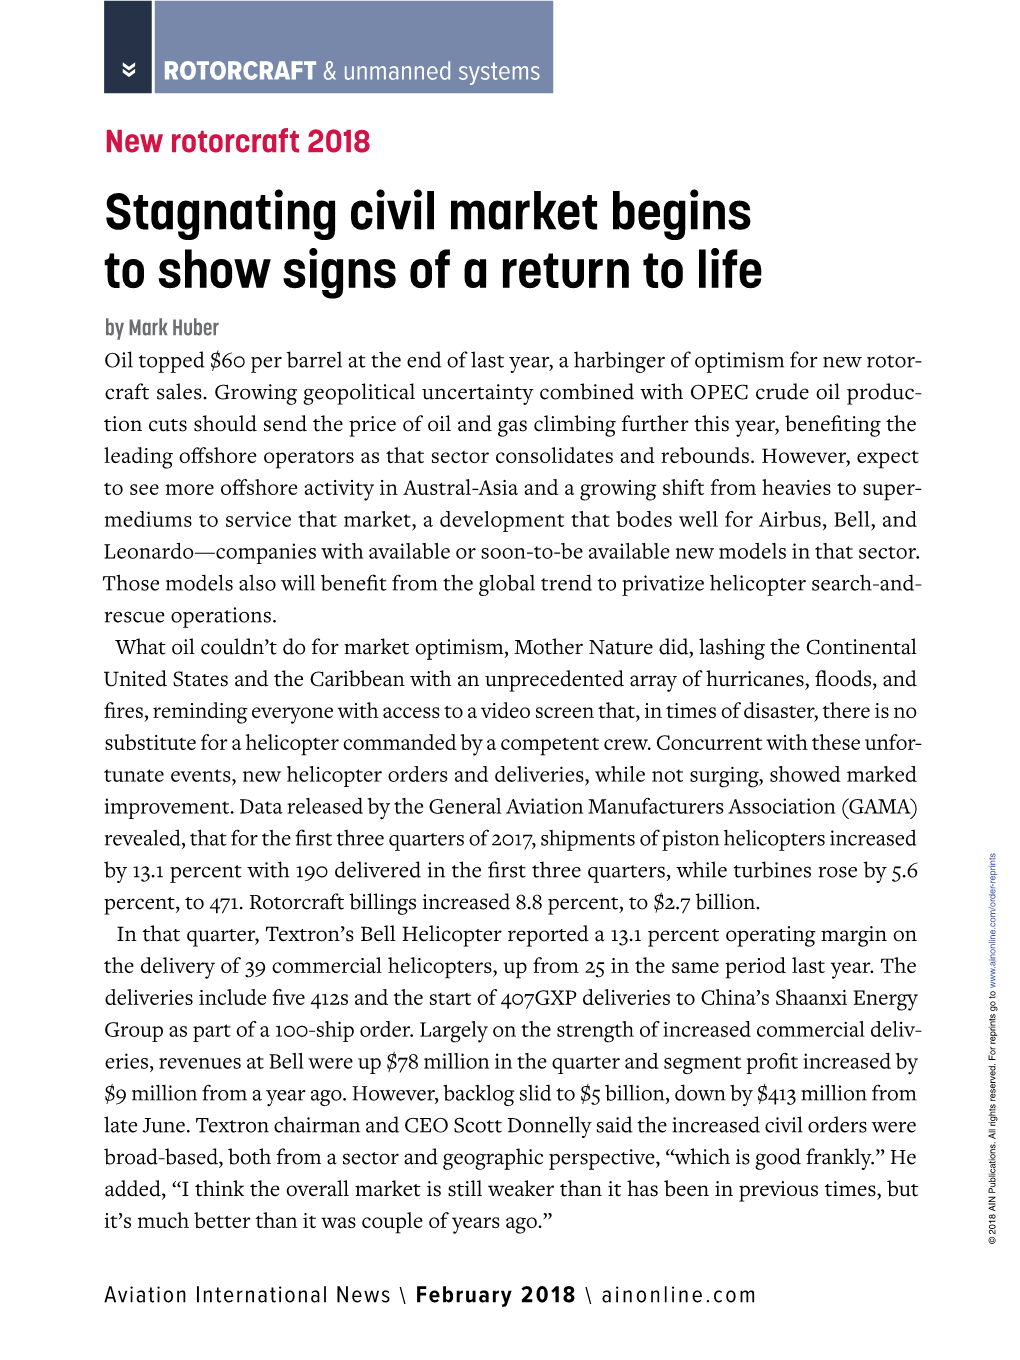 Stagnating Civil Market Begins to Show Signs of a Return to Life